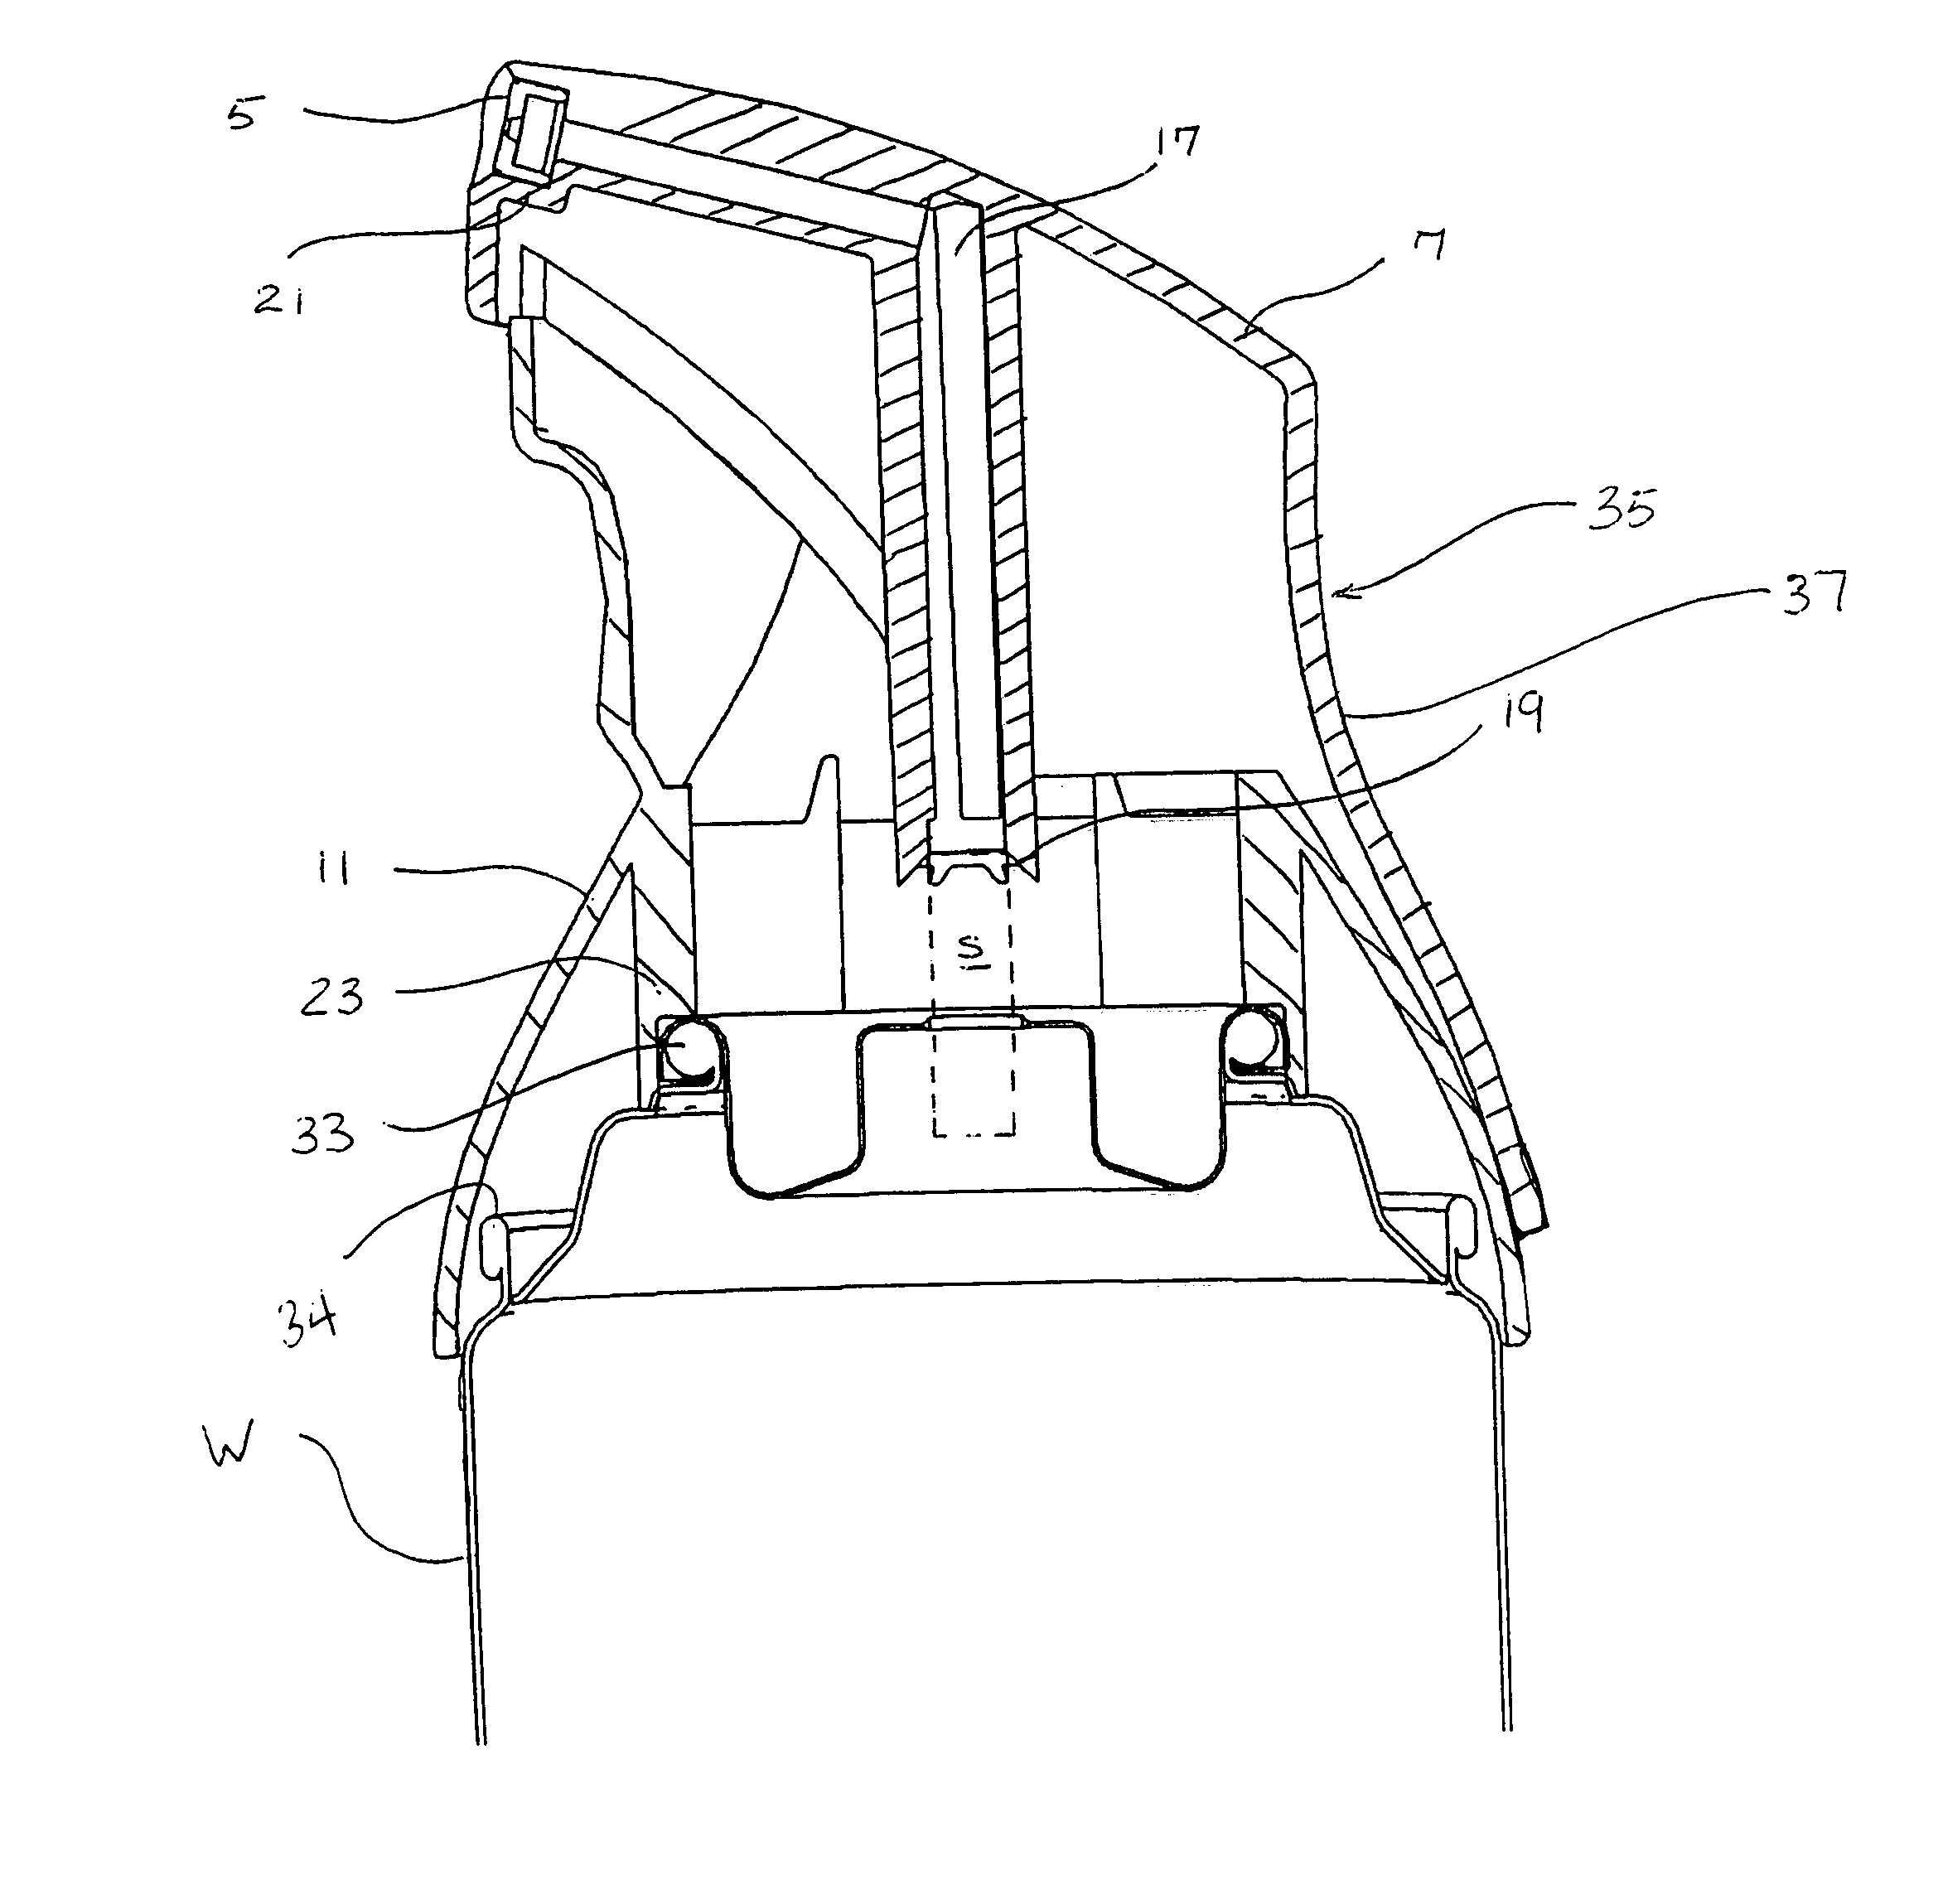 Spray actuating mechanism for a dispensing canister